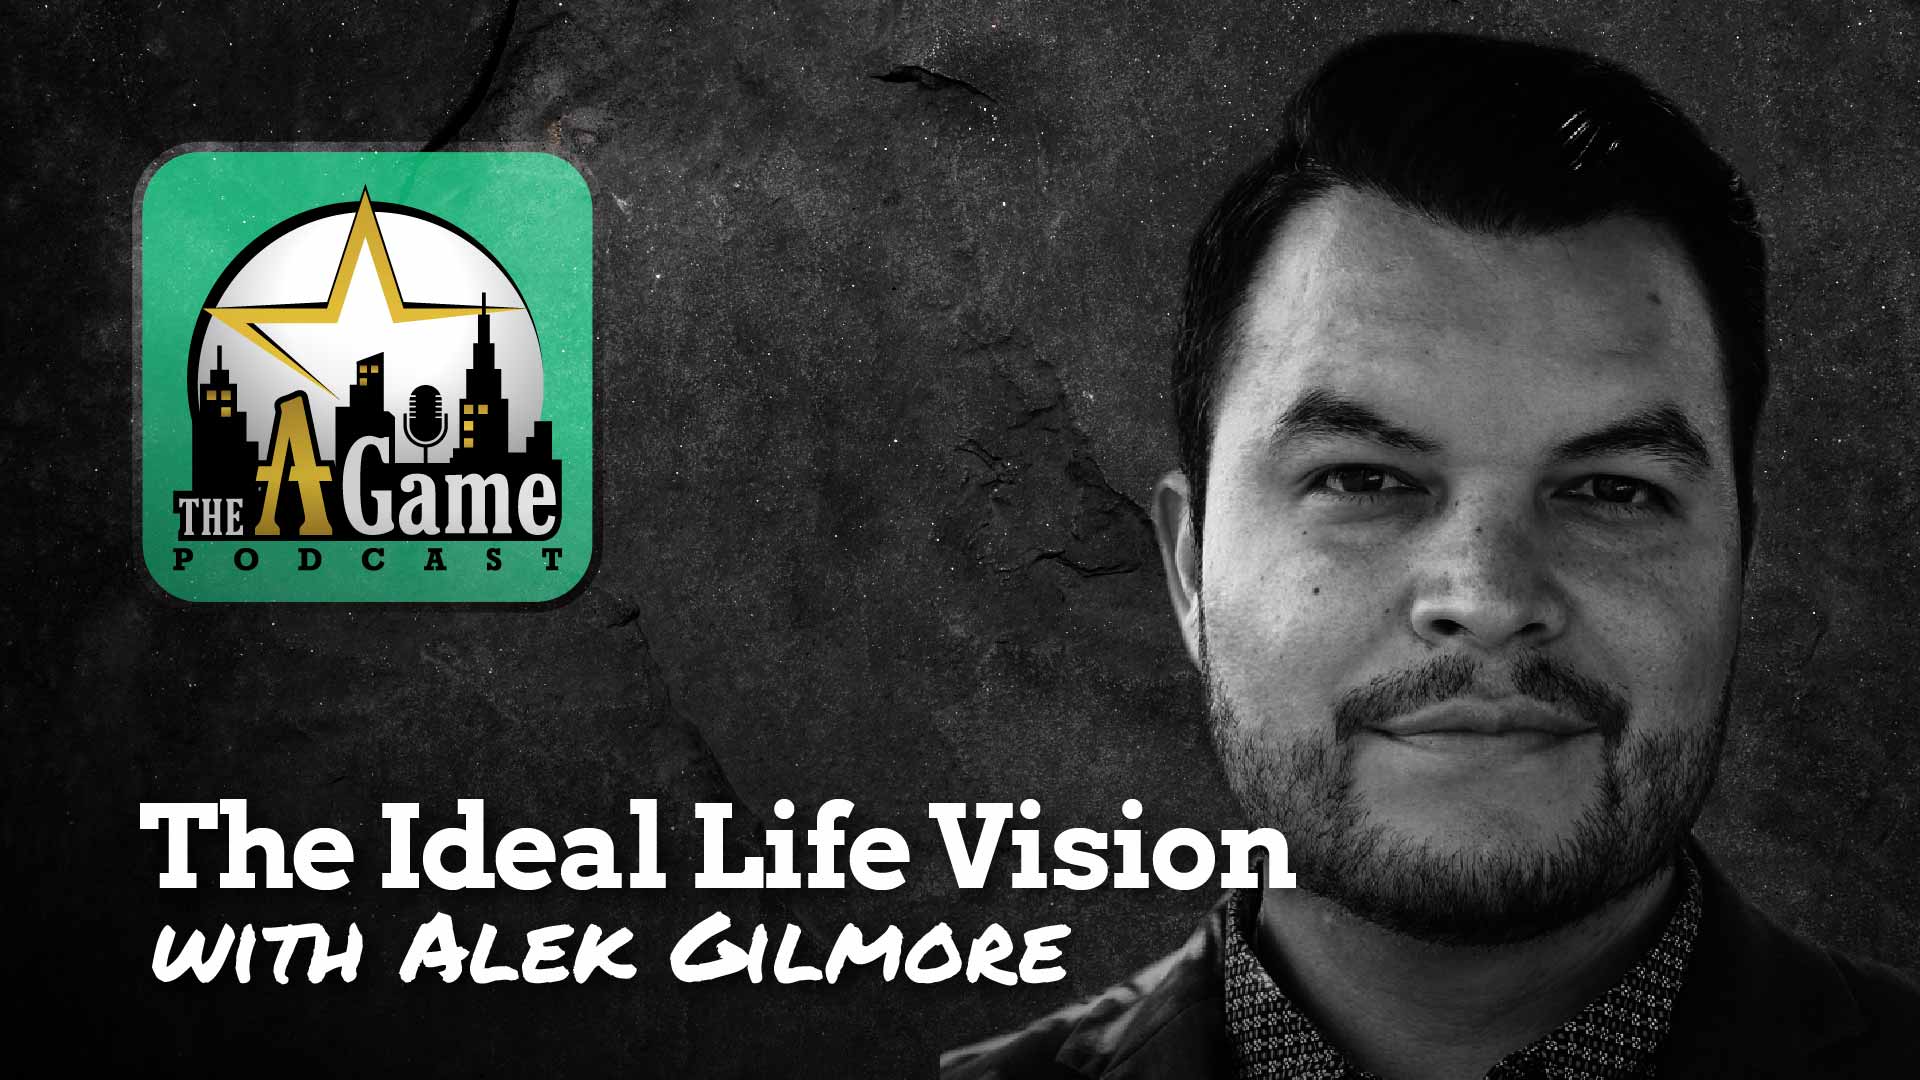 The Ideal Life Vision with Alek Gilmore